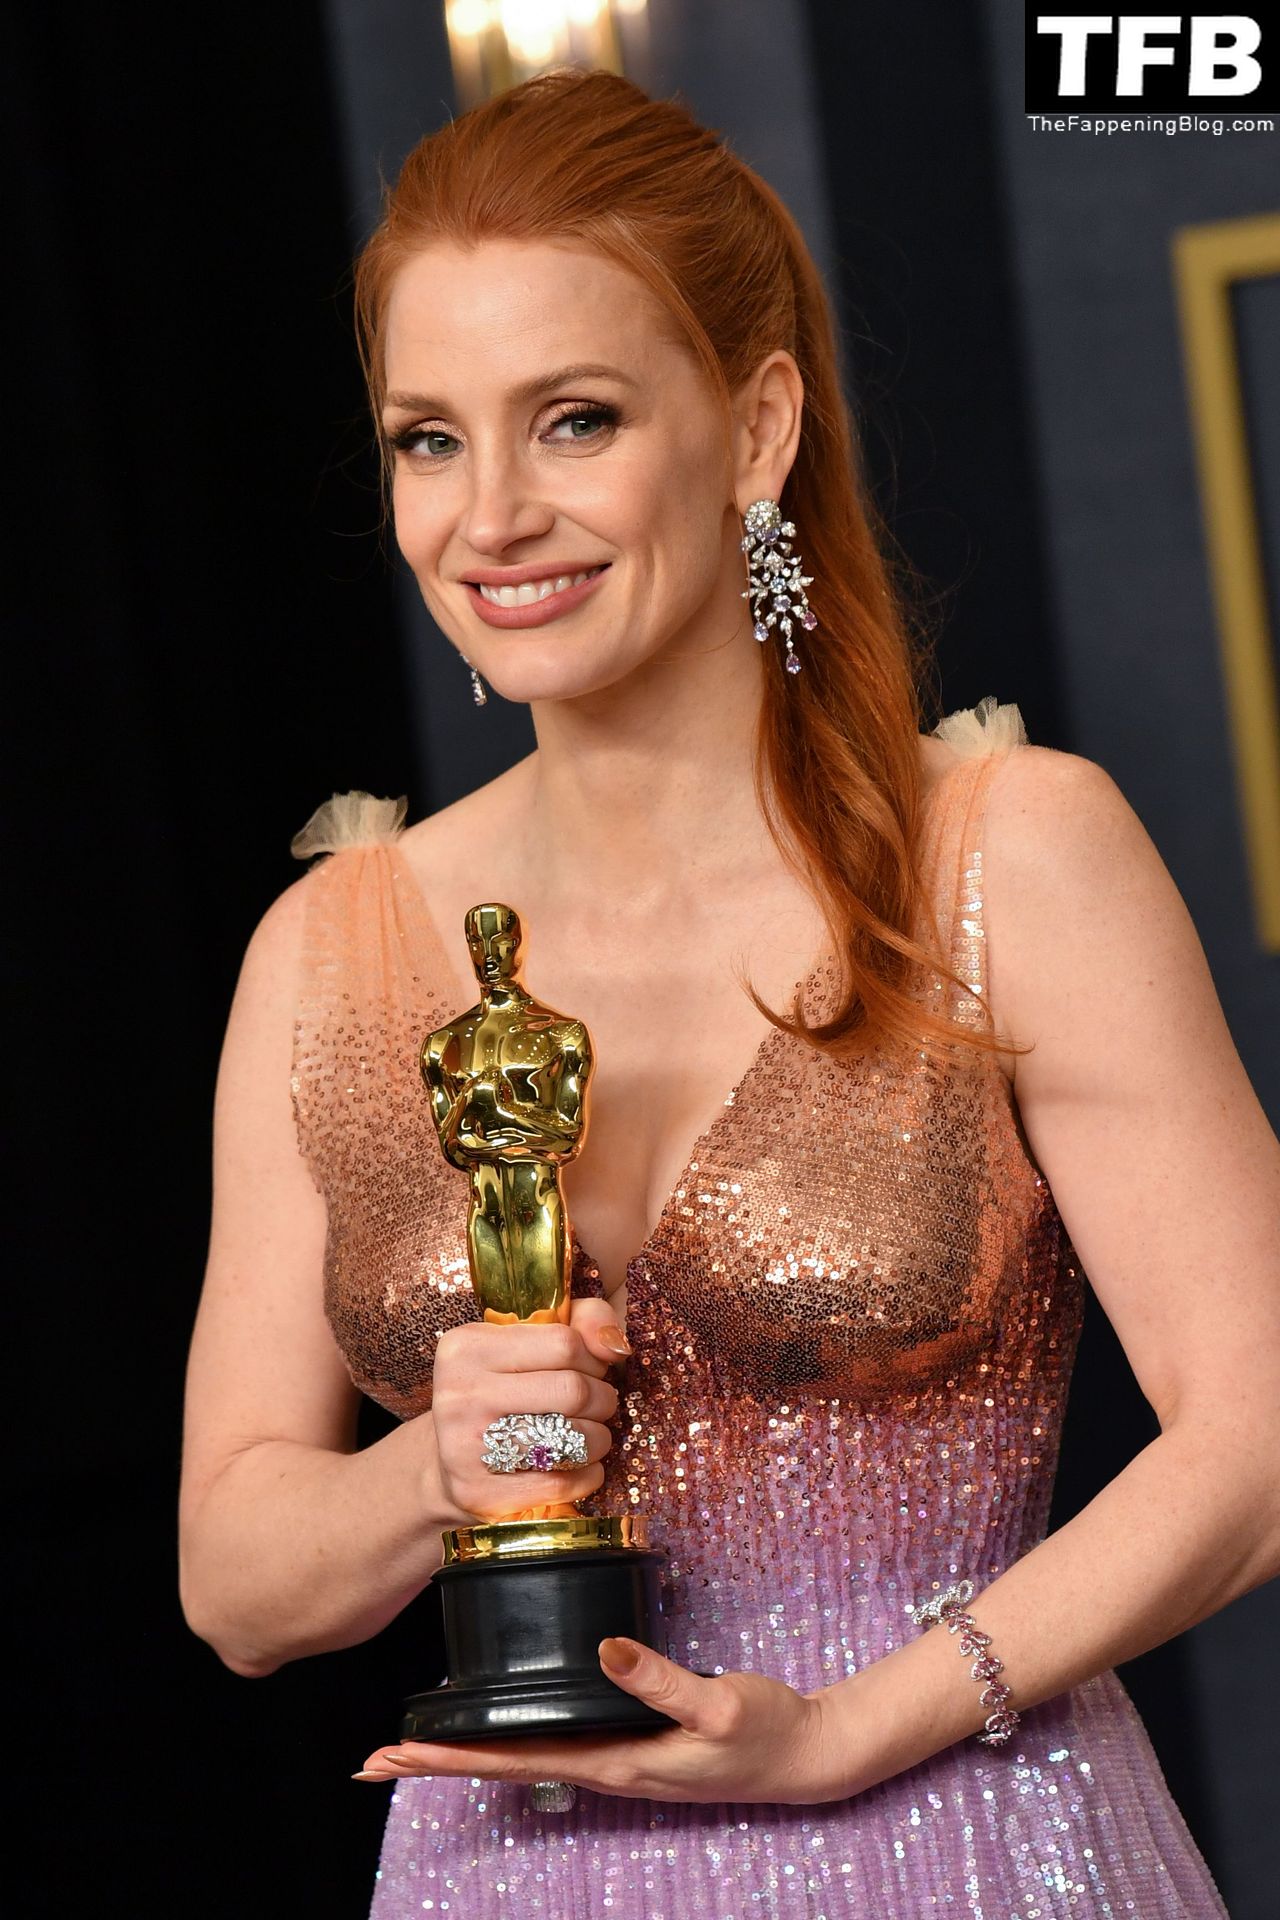 Jessica-Chastain-Sexy-The-Fappening-Blog-39-1.jpg